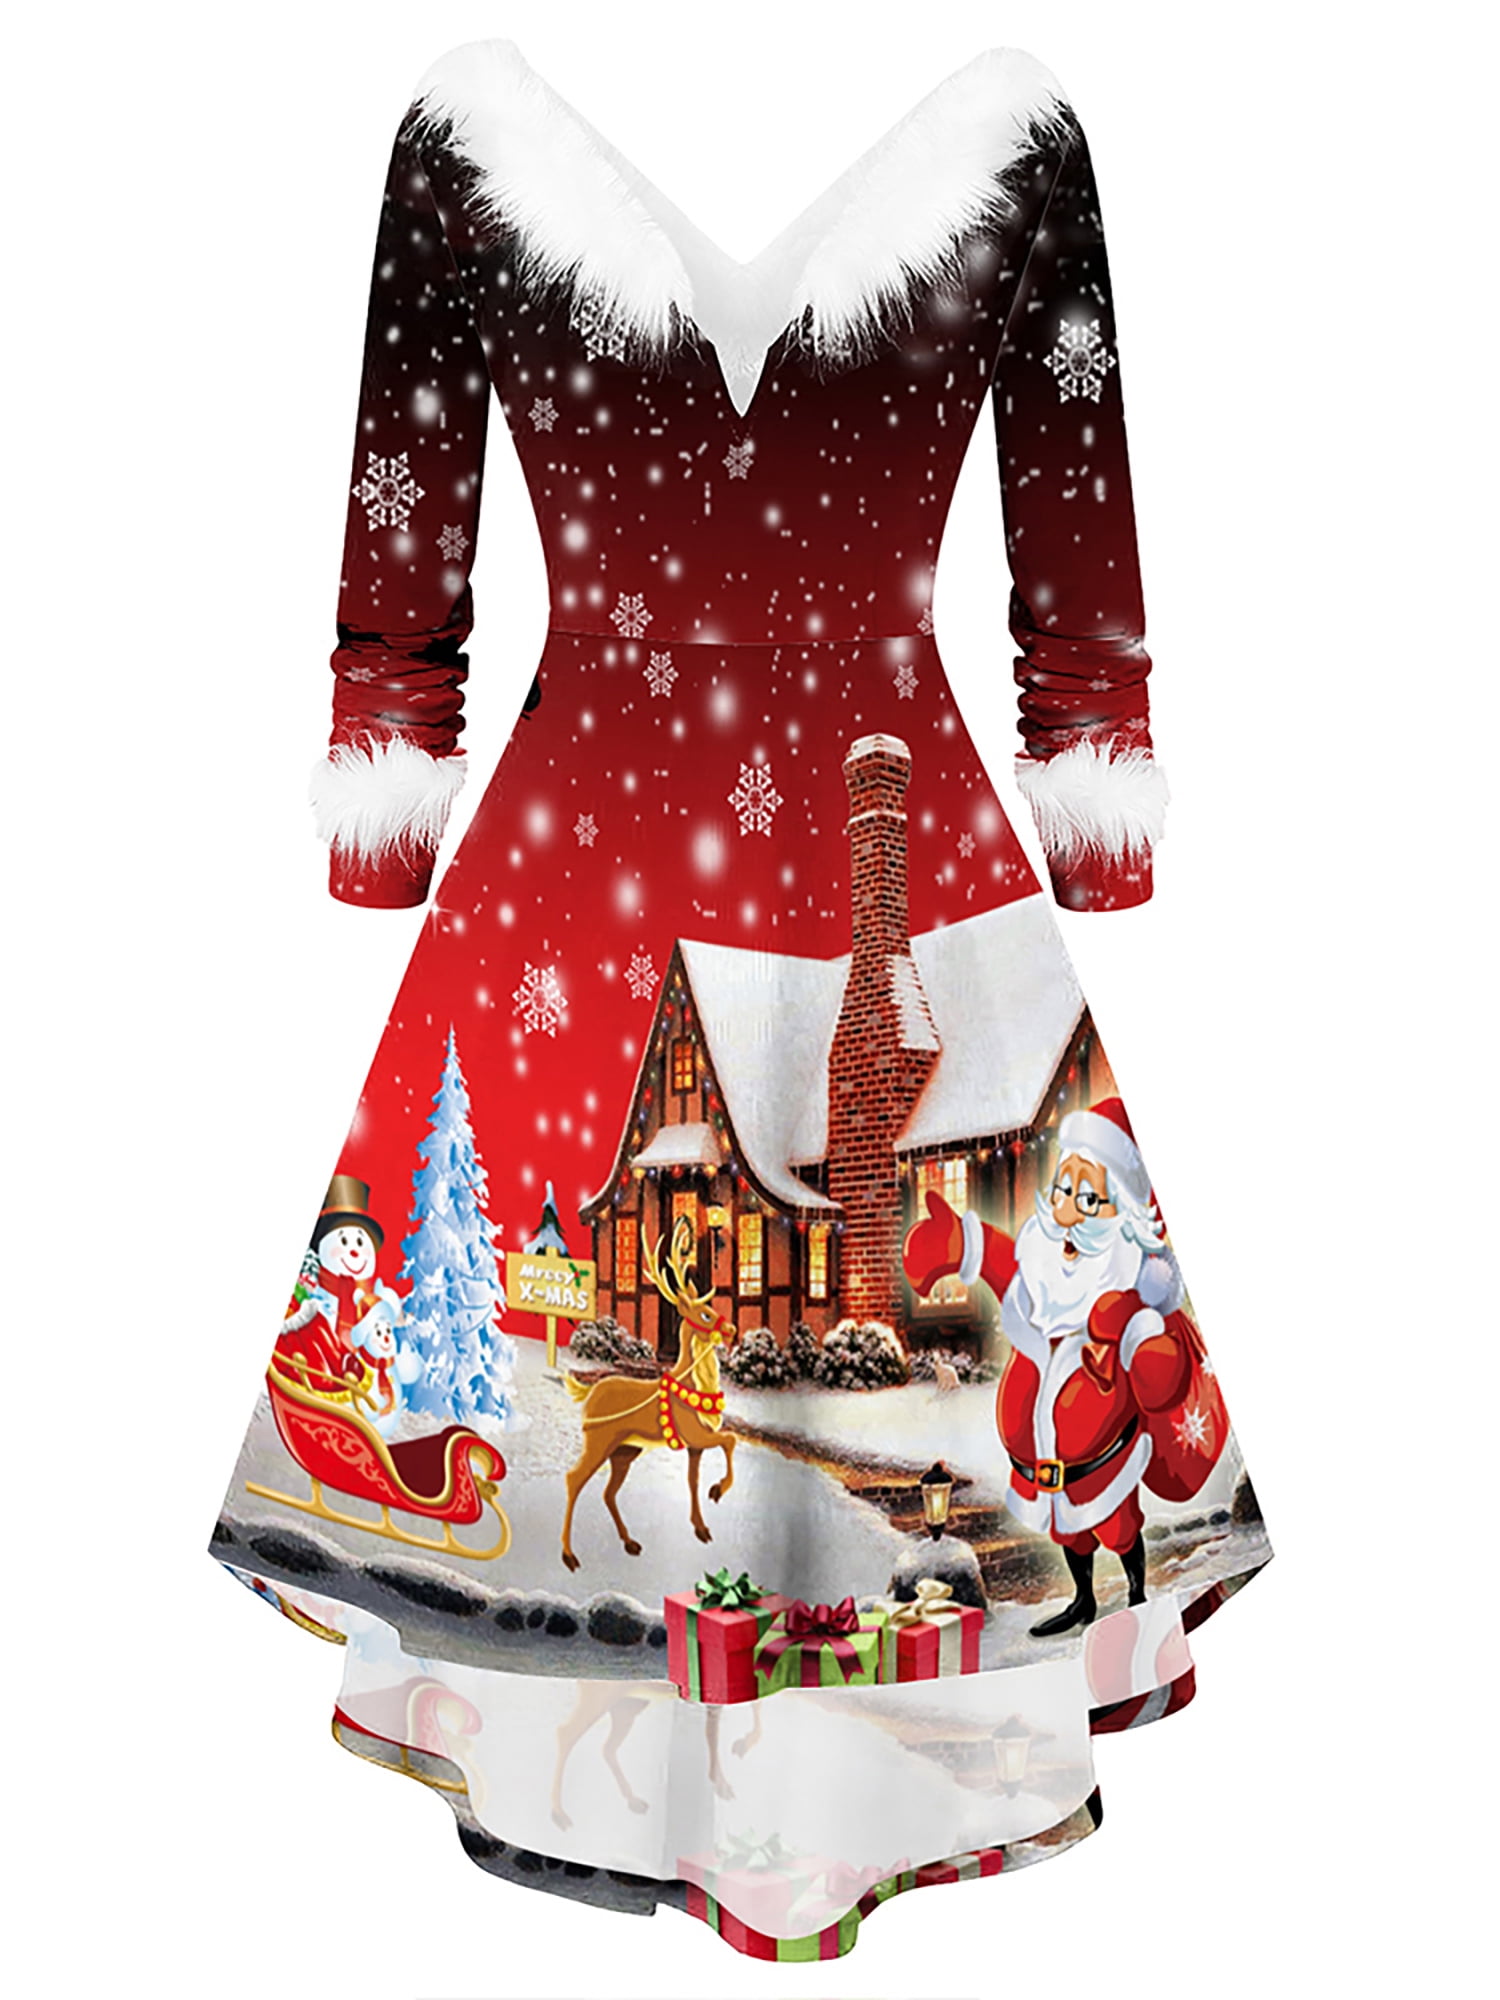 Santa Print Cocktail Dress for Women Fashion Elegant Retro Xmas Pleated Dress Lady 1950s Vintage Classy V Neck Full Sleeves Evening Party High Waist A Line Dresses Swing Christmas Flared Gown 